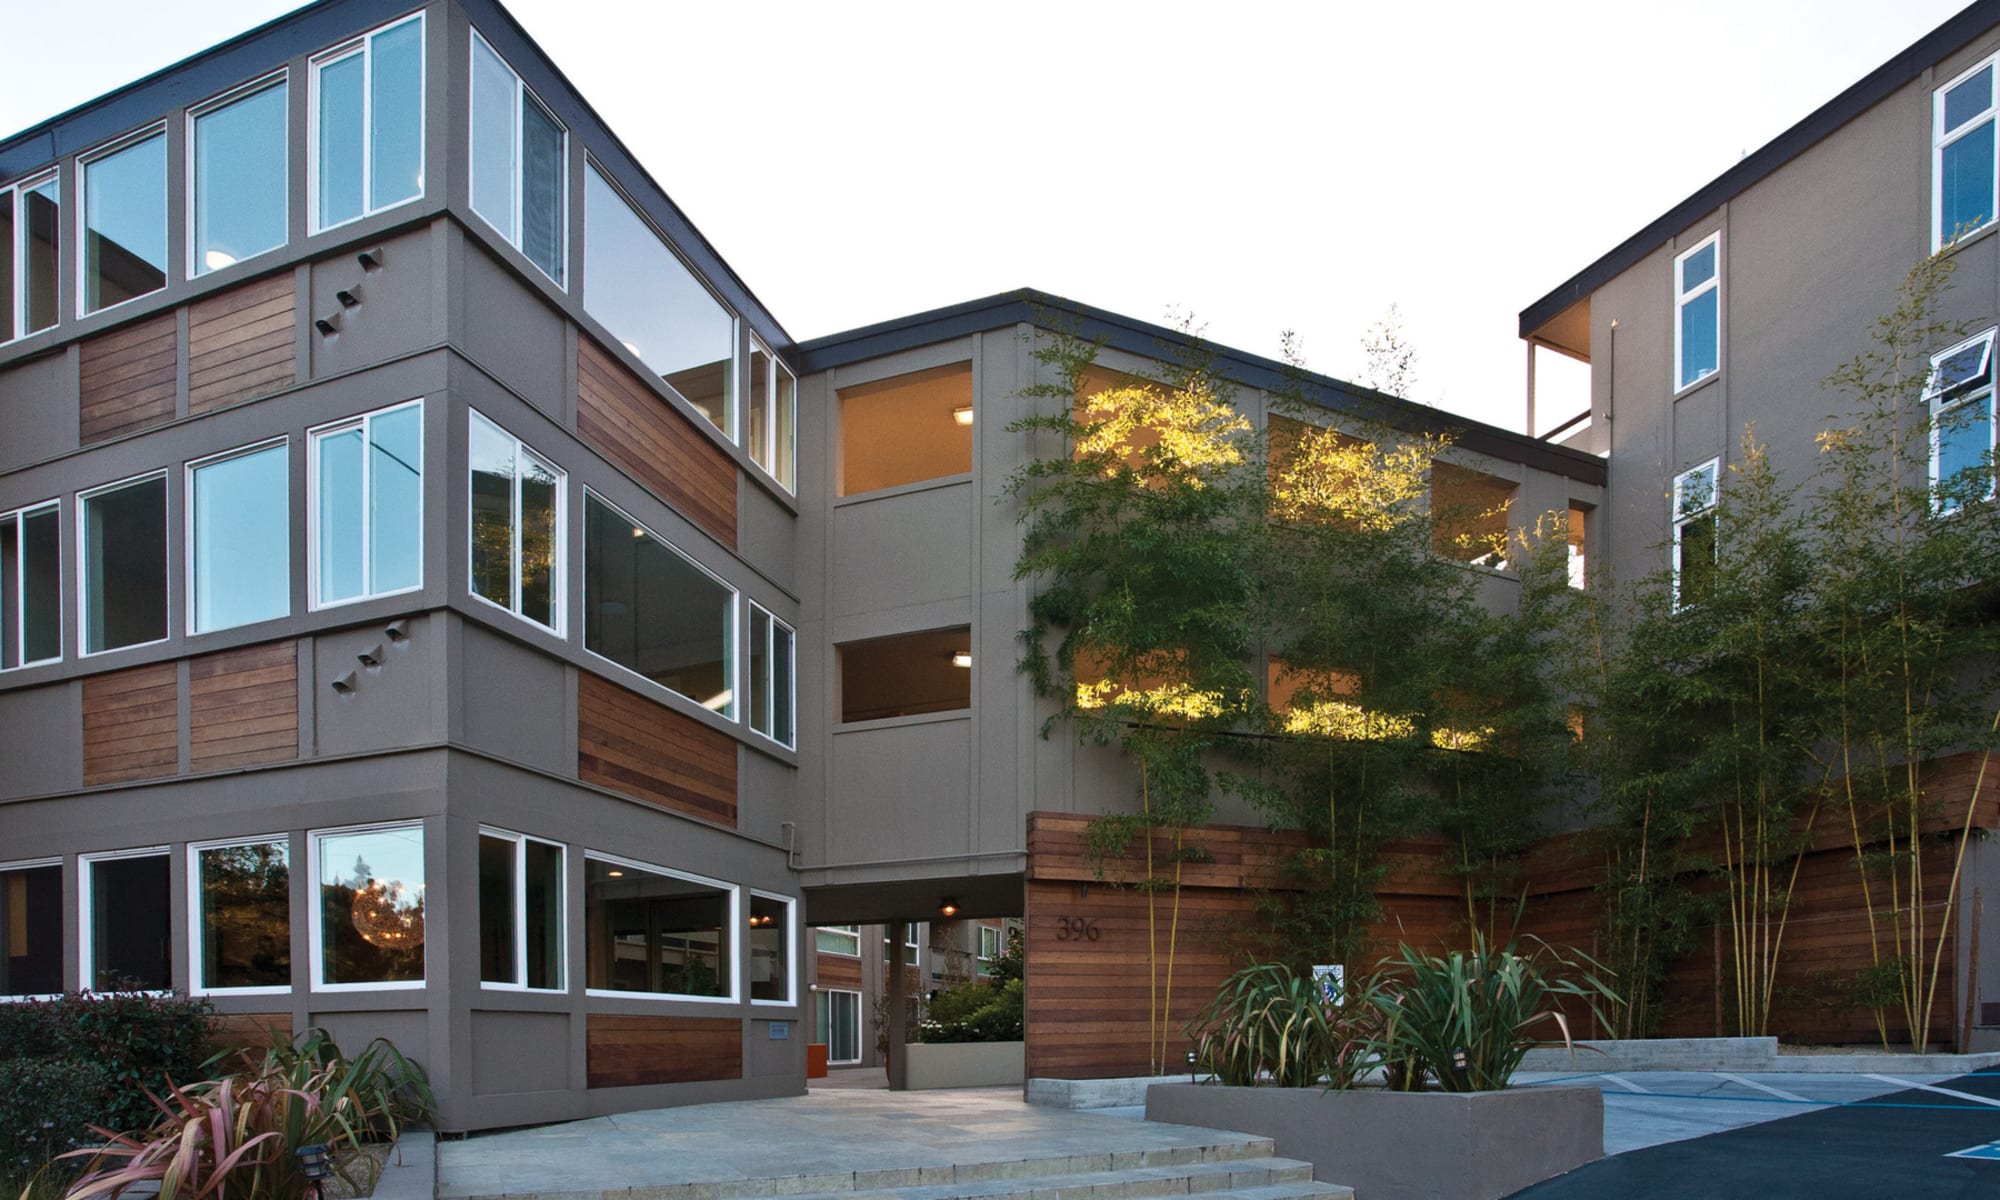 Modern apartments at Pineridge in Mill Valley, California